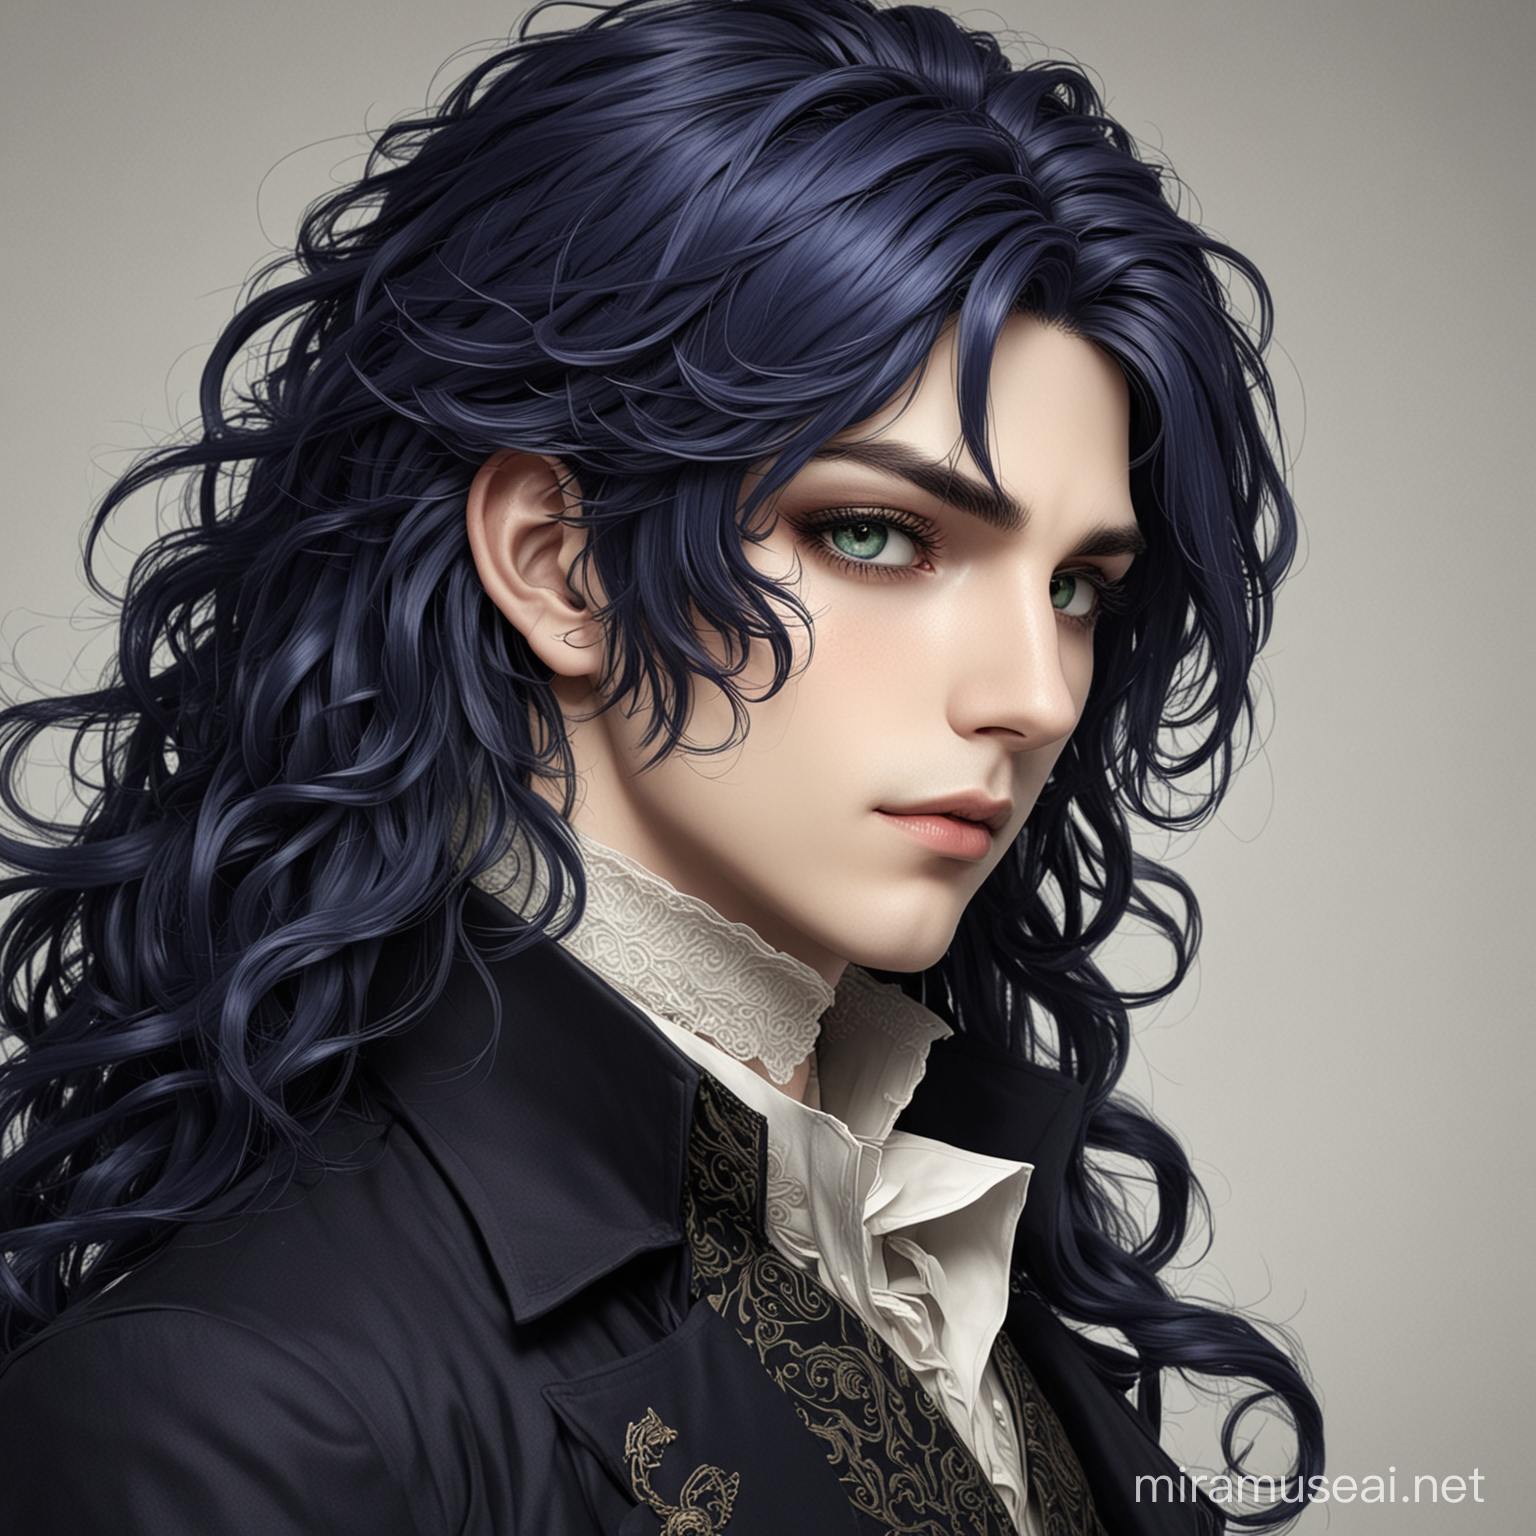 Gothic Anime Character with Long Curly Dark Blue Hair in Victorian Style